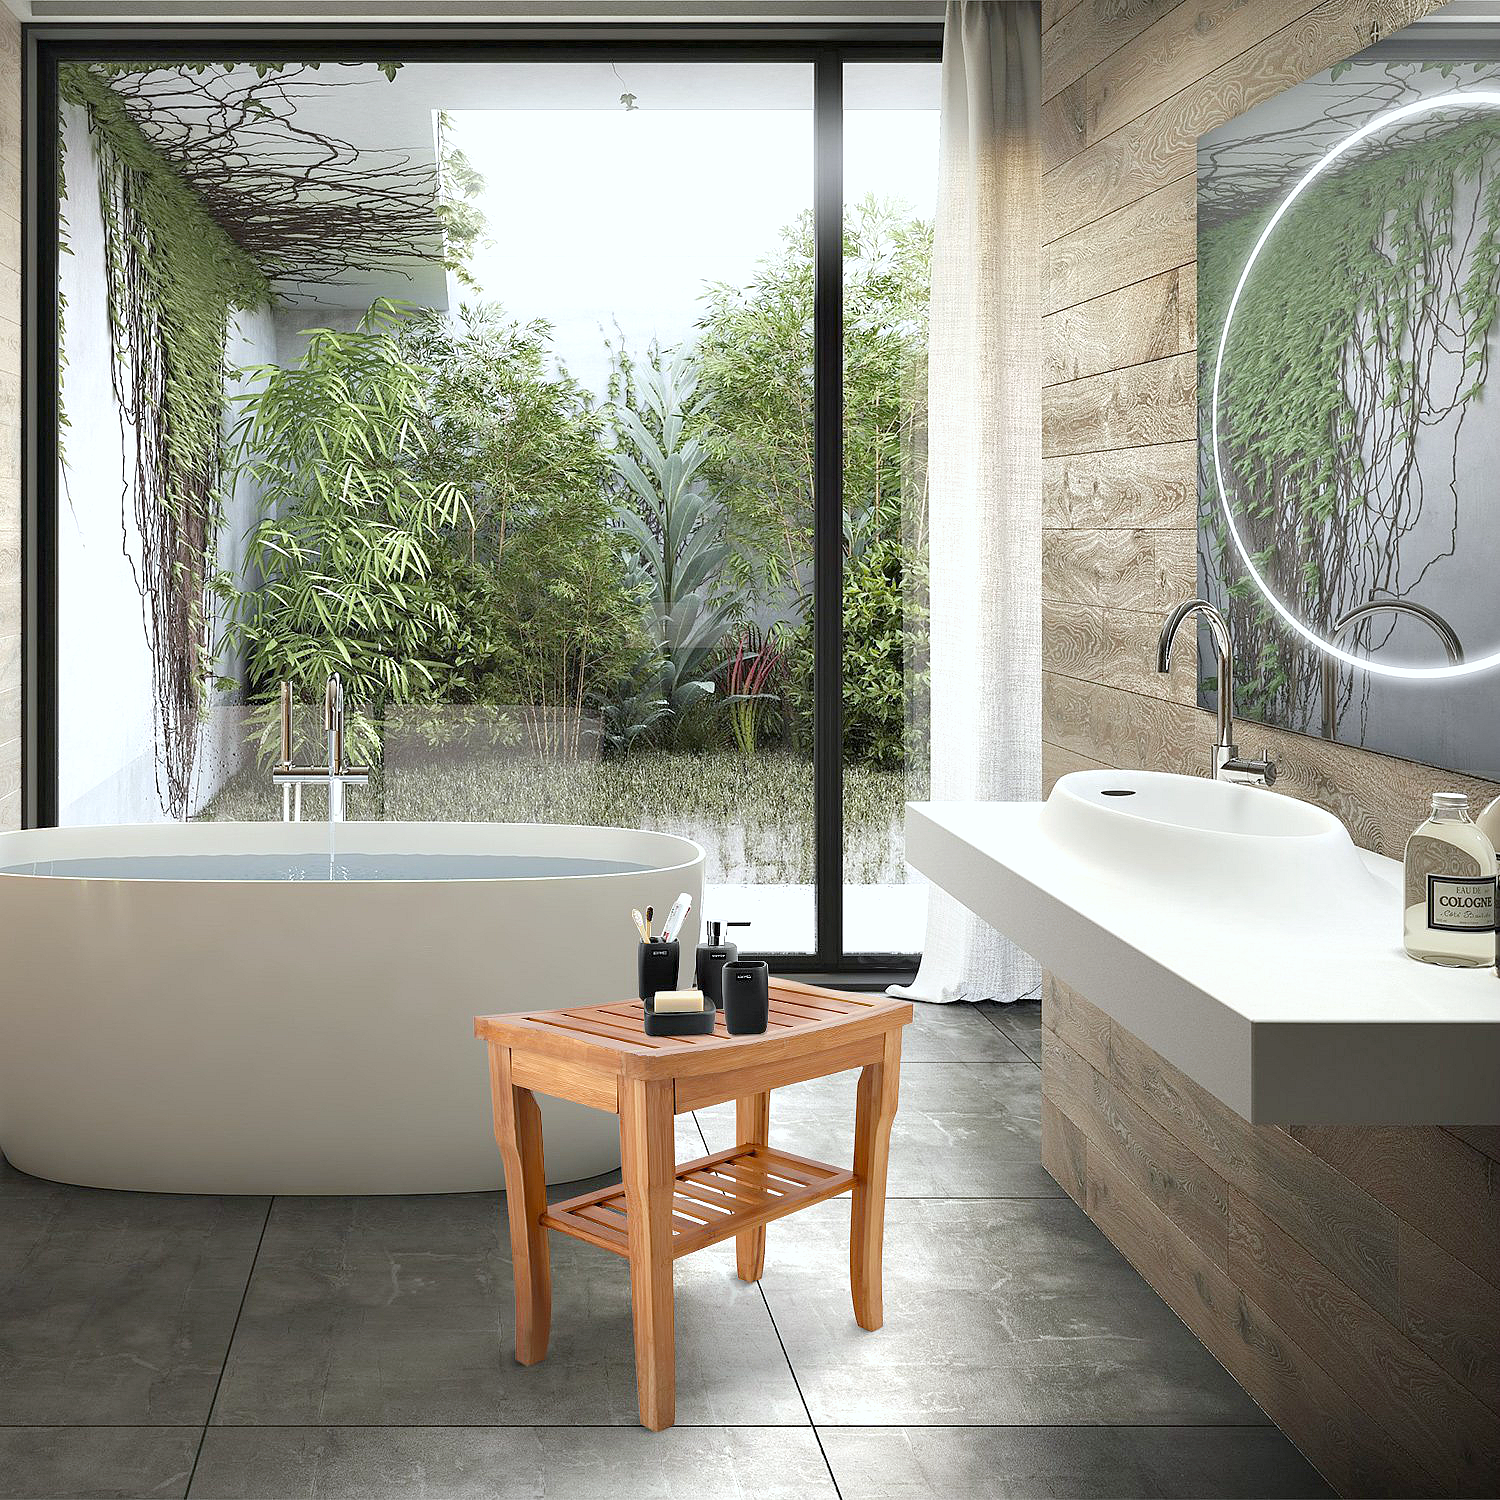 A serene bathroom is pictured with a great view of the outdoors, a bamboo shower bench sits next to a standalone tub next to a floating sink.